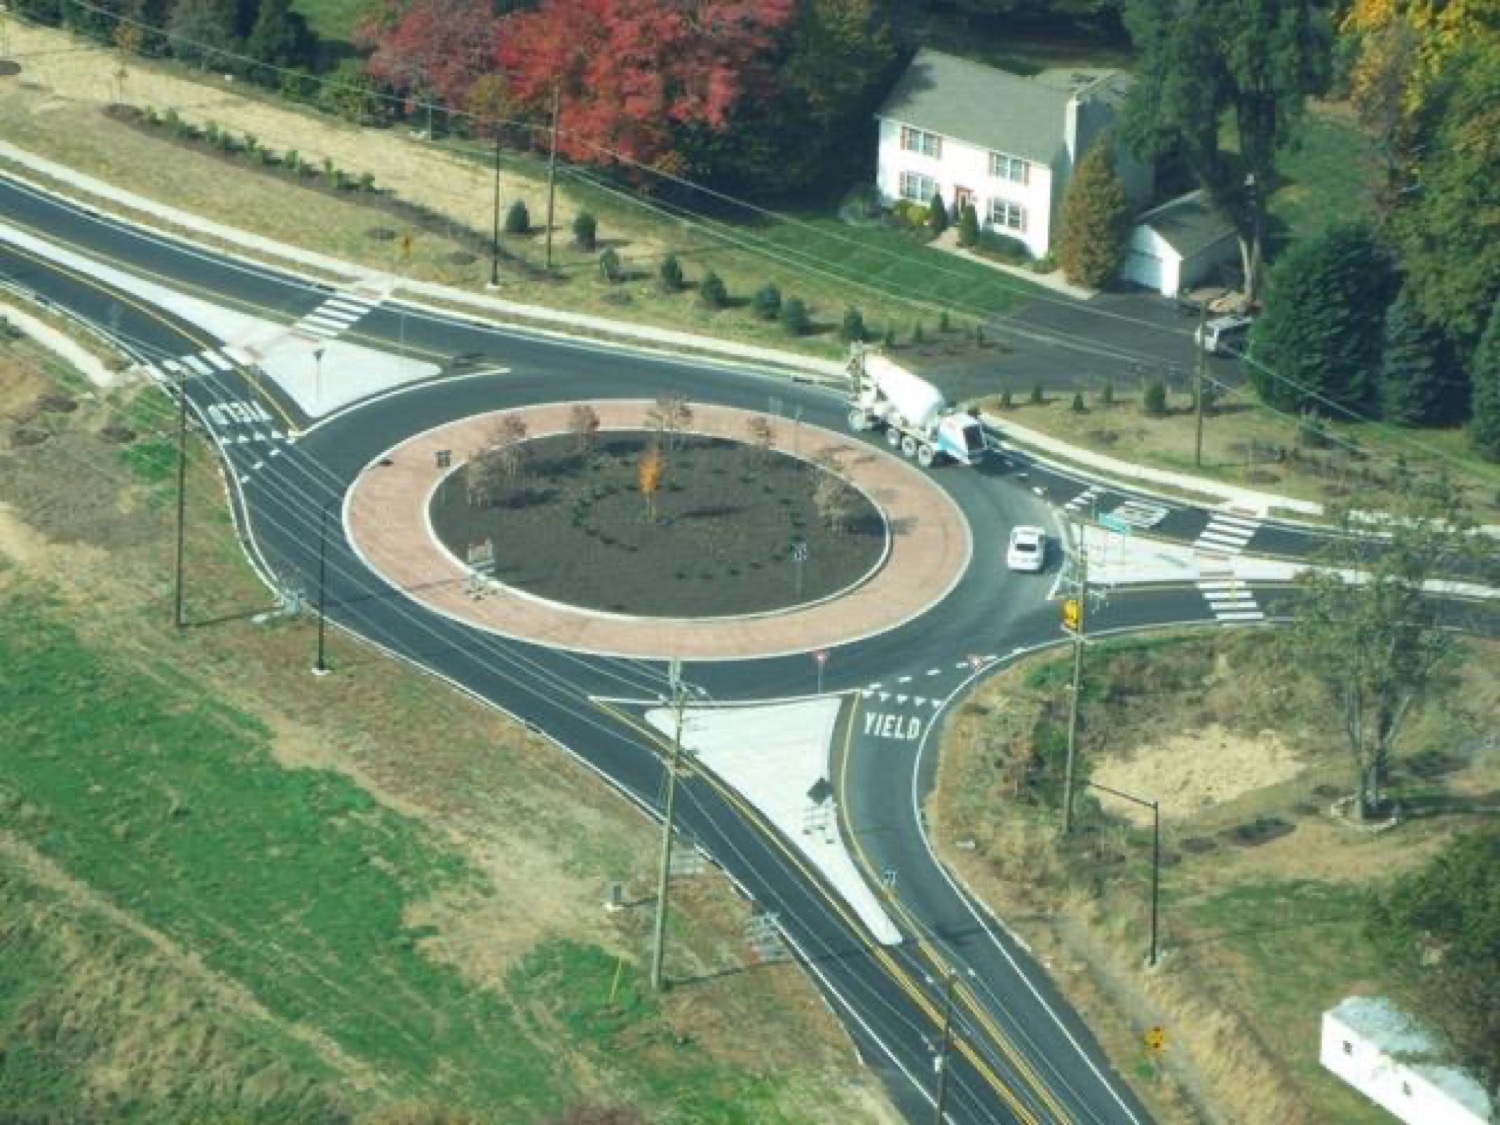 Route 213 (Bridgetown Pike-Maple Avenue) and Route 2010 (Bridgetown Pike)<br><a href="https://filesource.amperwave.net/commonwealthofpa/photo/22209_dot_roundabout_photo_12.jpg" target="_blank">⇣ Download Photo</a>